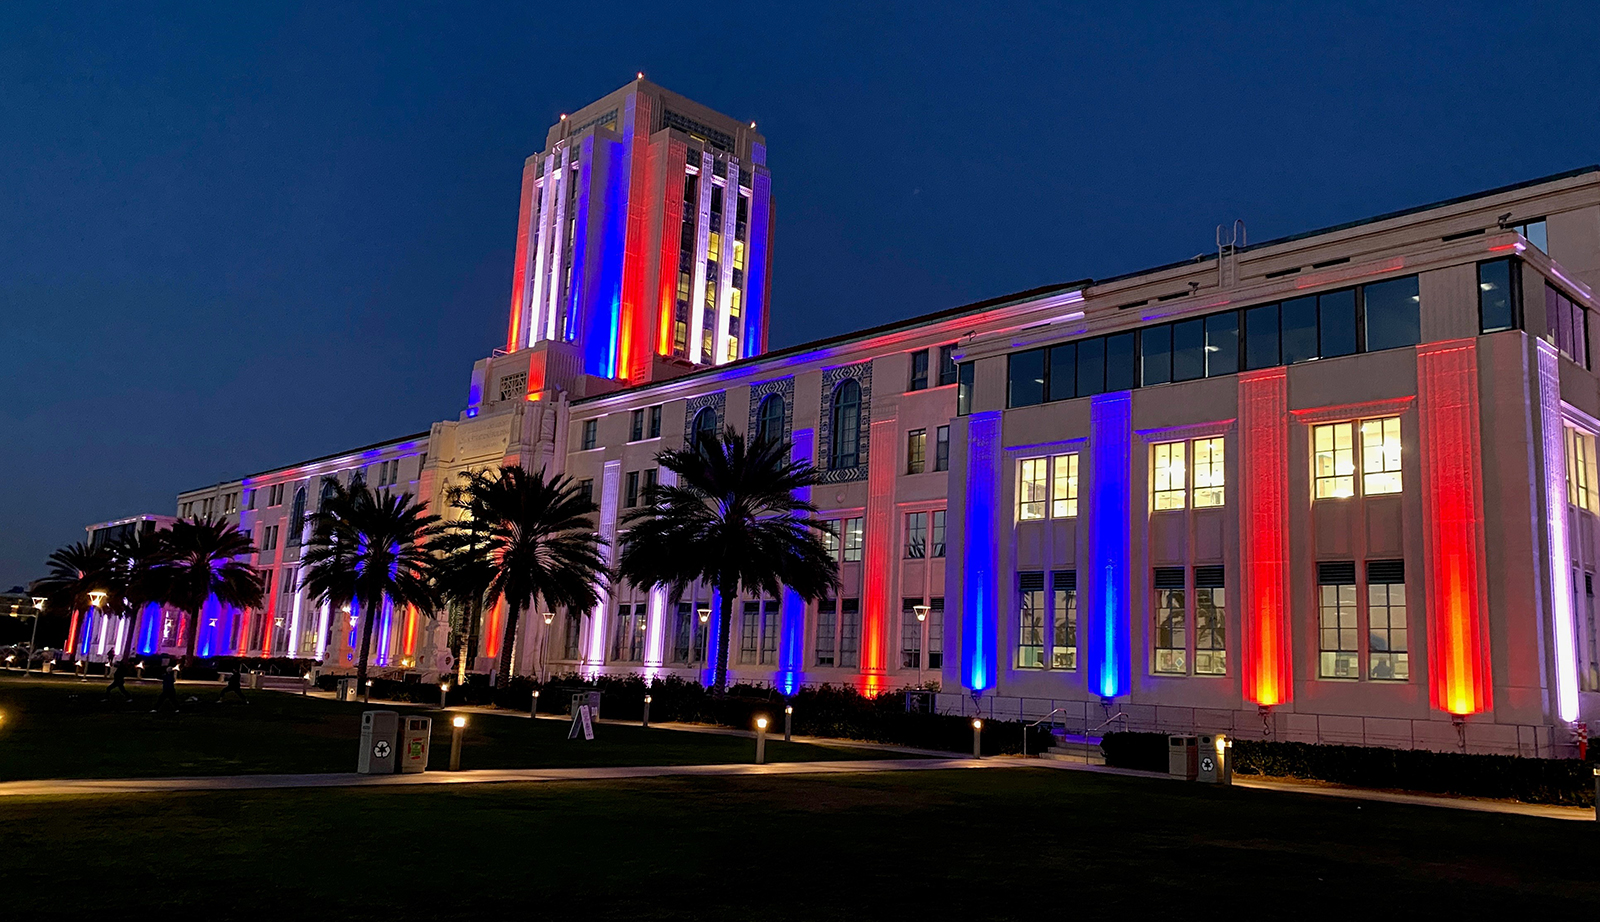 The County Administration Center is lit up in red, white and blue.